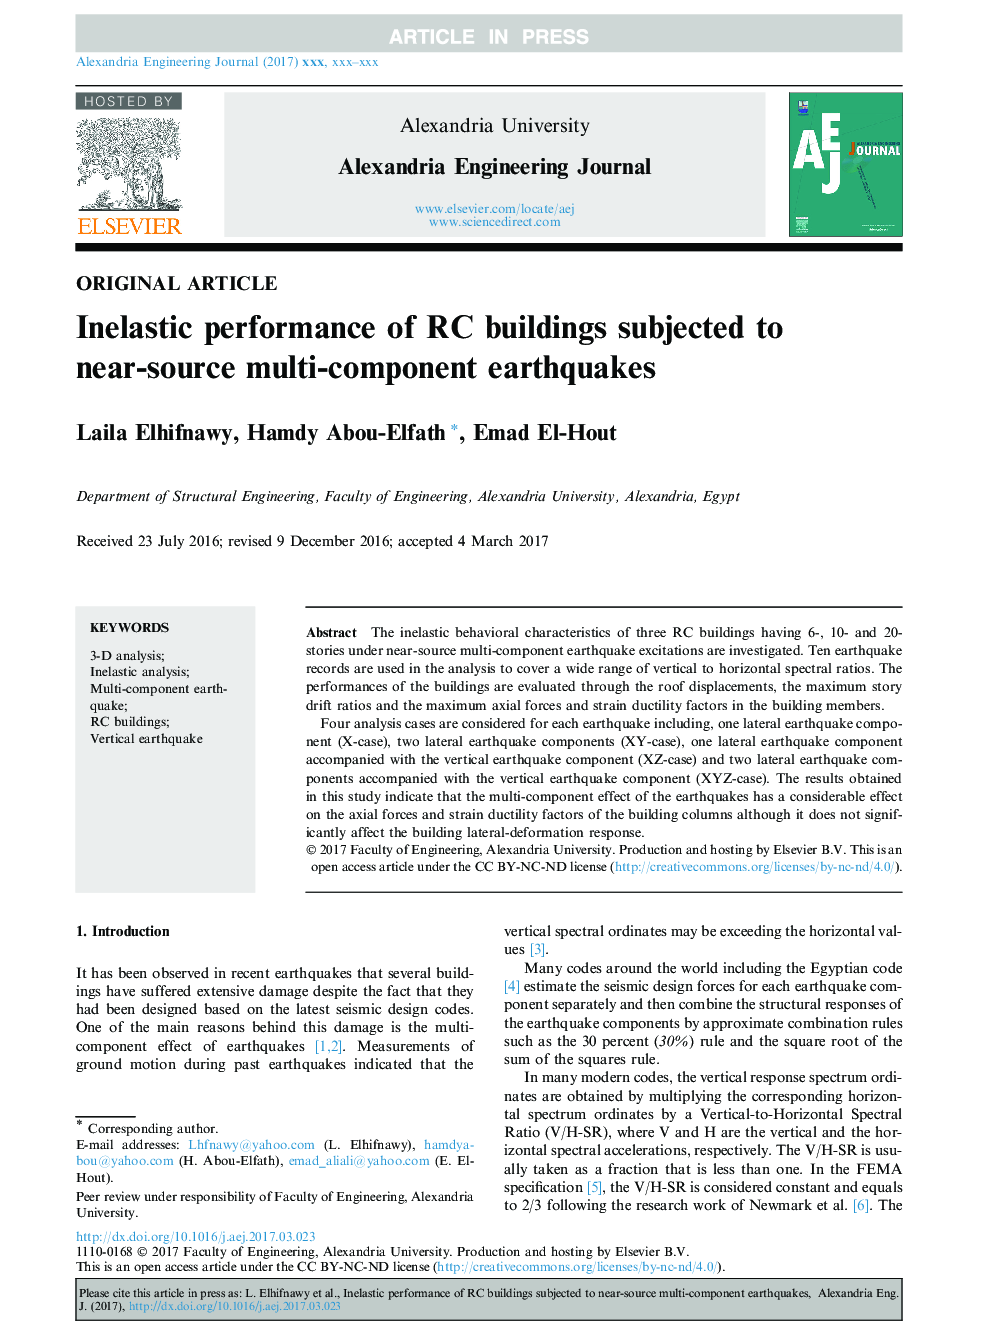 Inelastic performance of RC buildings subjected to near-source multi-component earthquakes